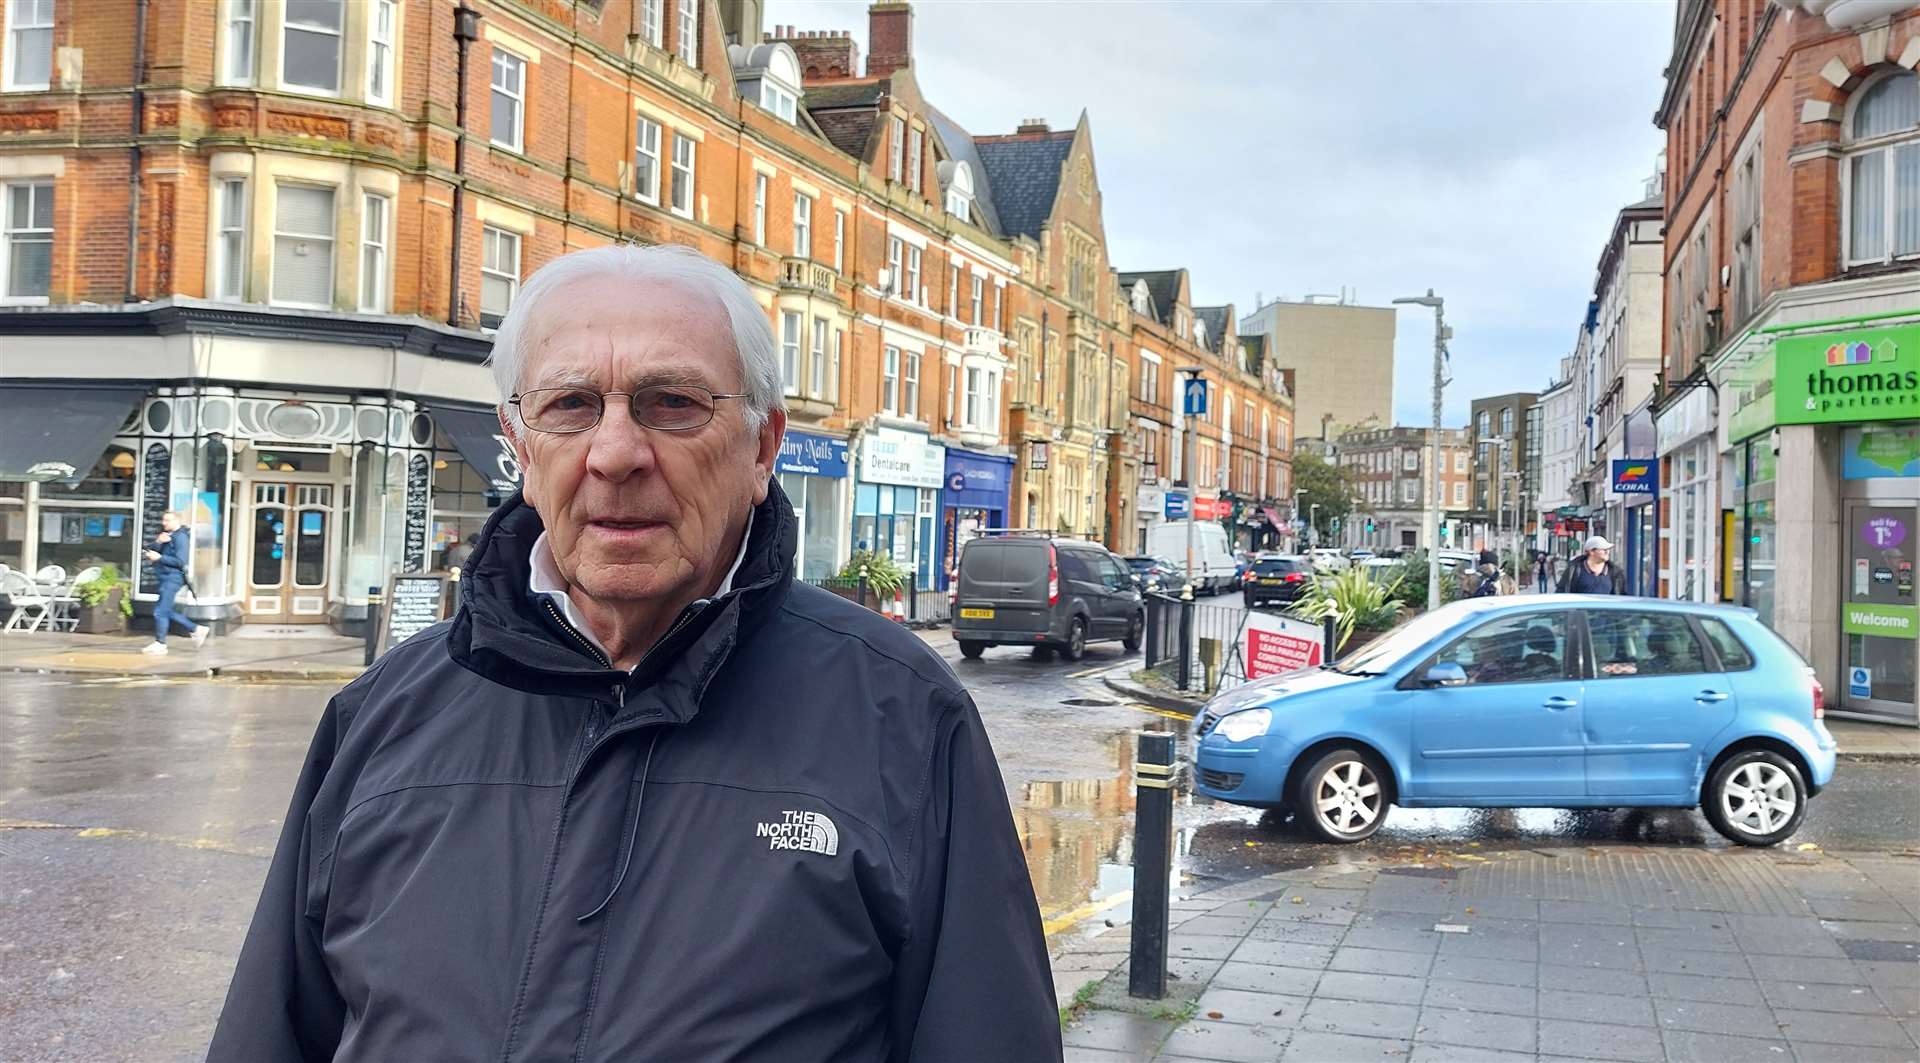 Martyn Jackson says he will fight to save free parking